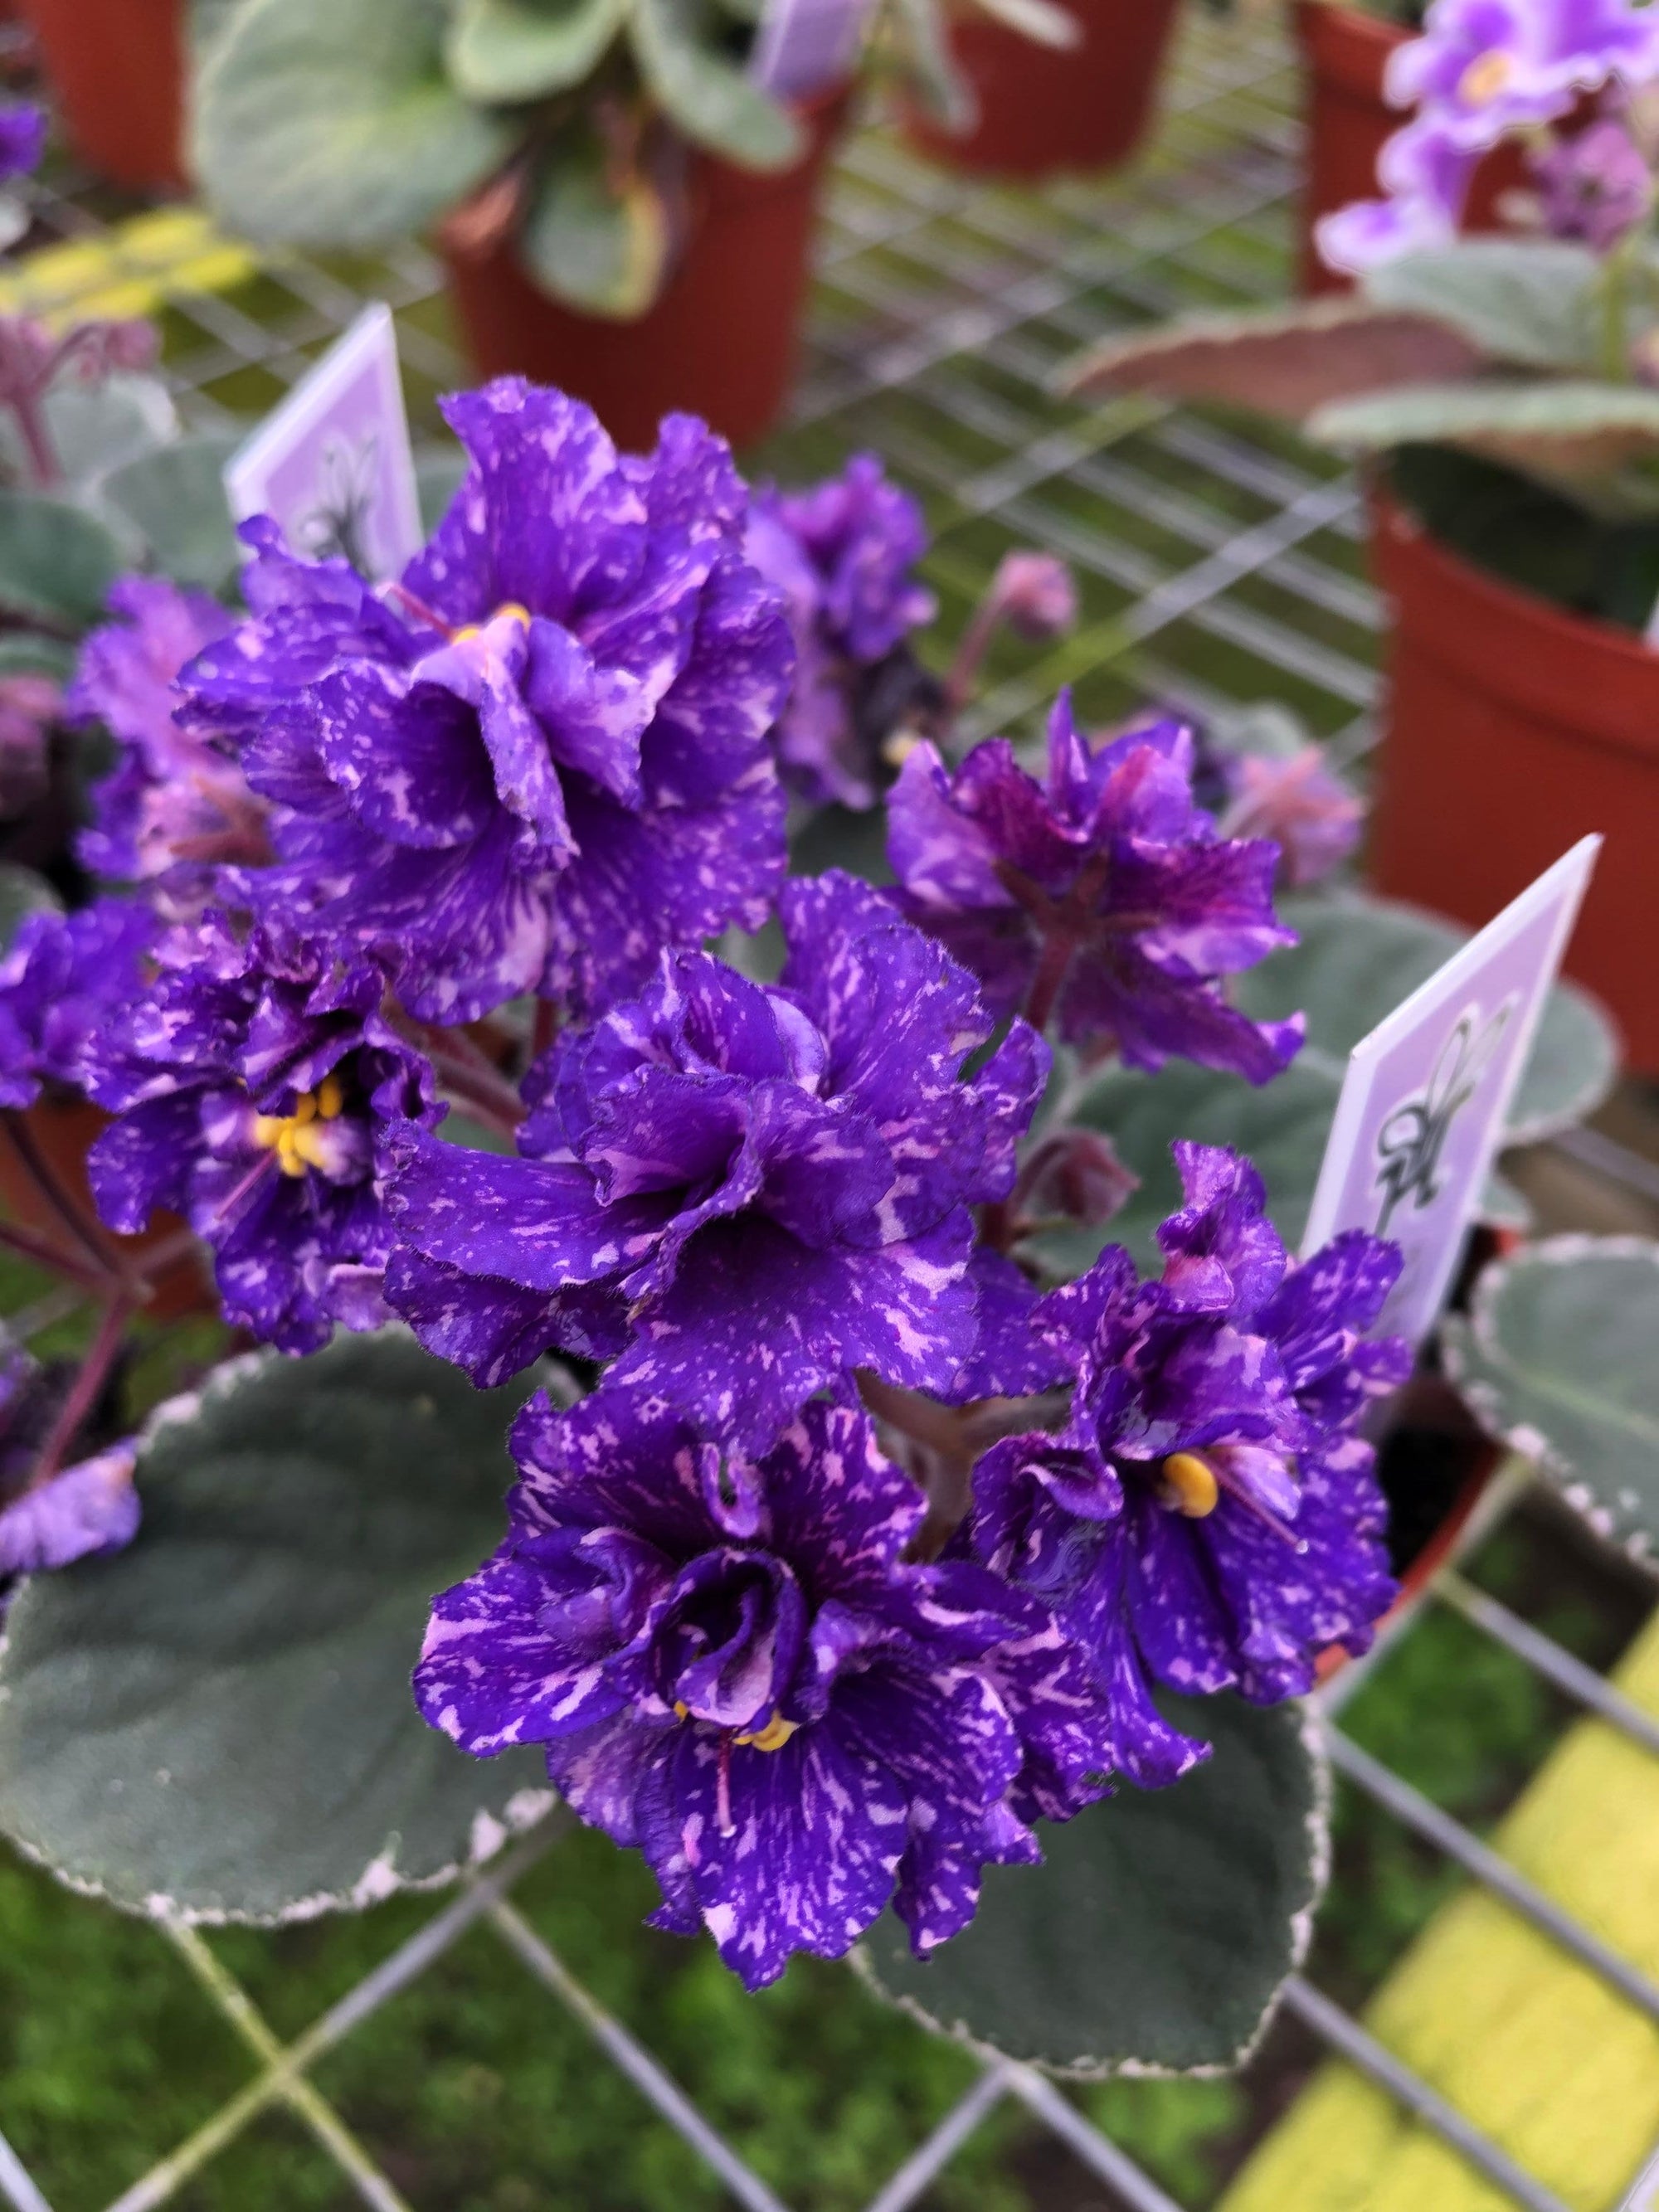 Live house plant Harmonys African Violet Ruffled Cajuns Beautiful Oblivion Sport variegated purple garden 4 flower Potted gift